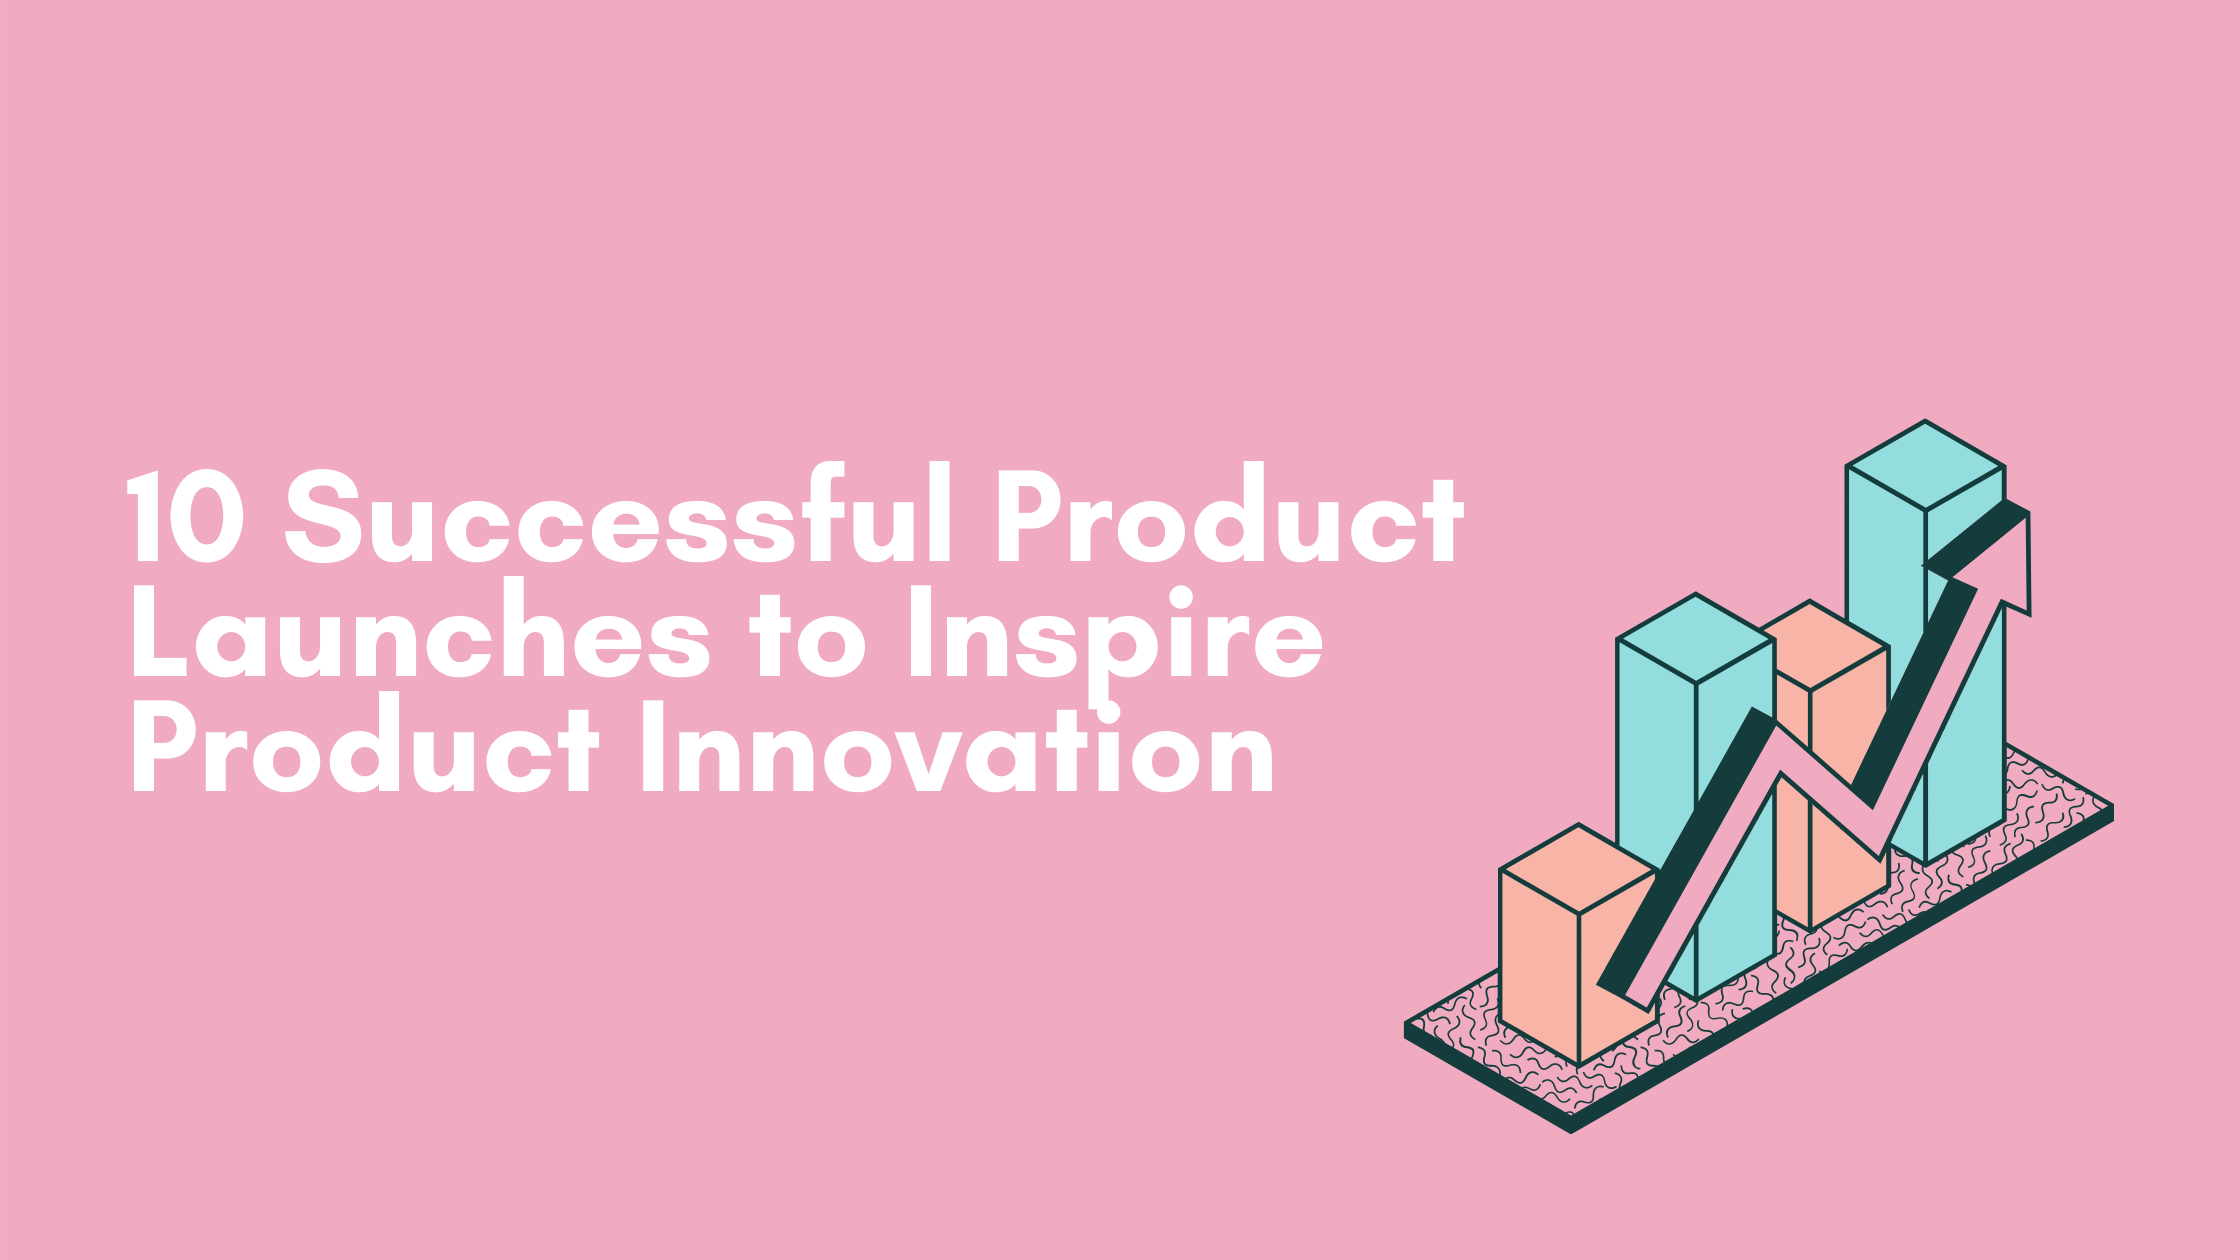 10 Successful Product Launches